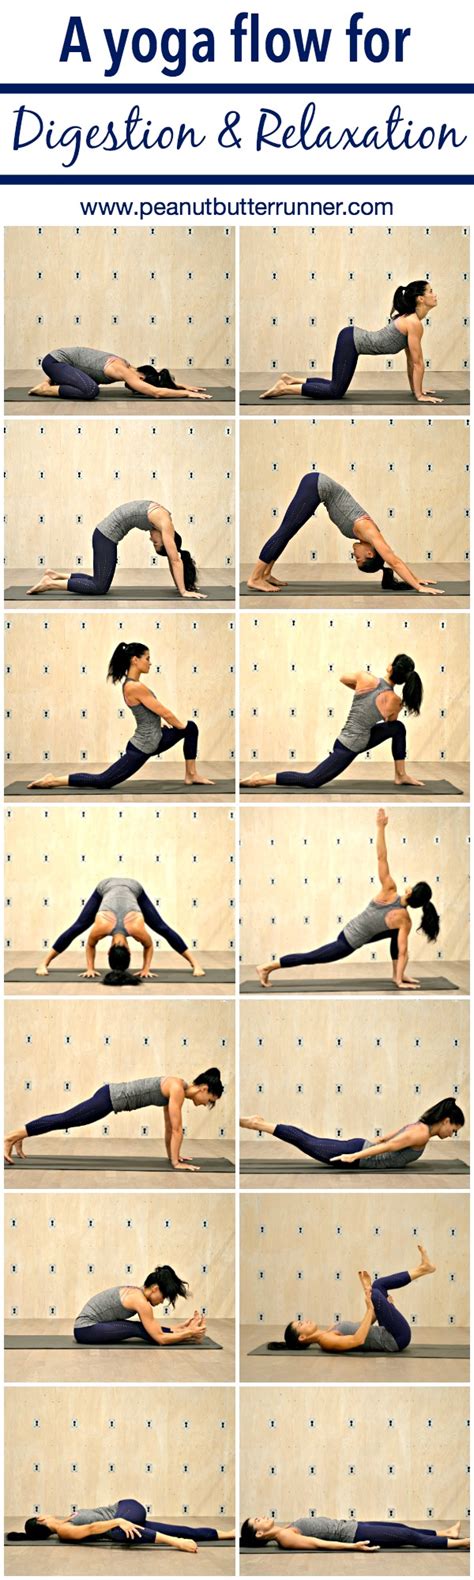 Triangle pose is a good yoga pose for digestion as it stimulate the digestive organs. Yoga Flow for Digestive Health & Relaxation